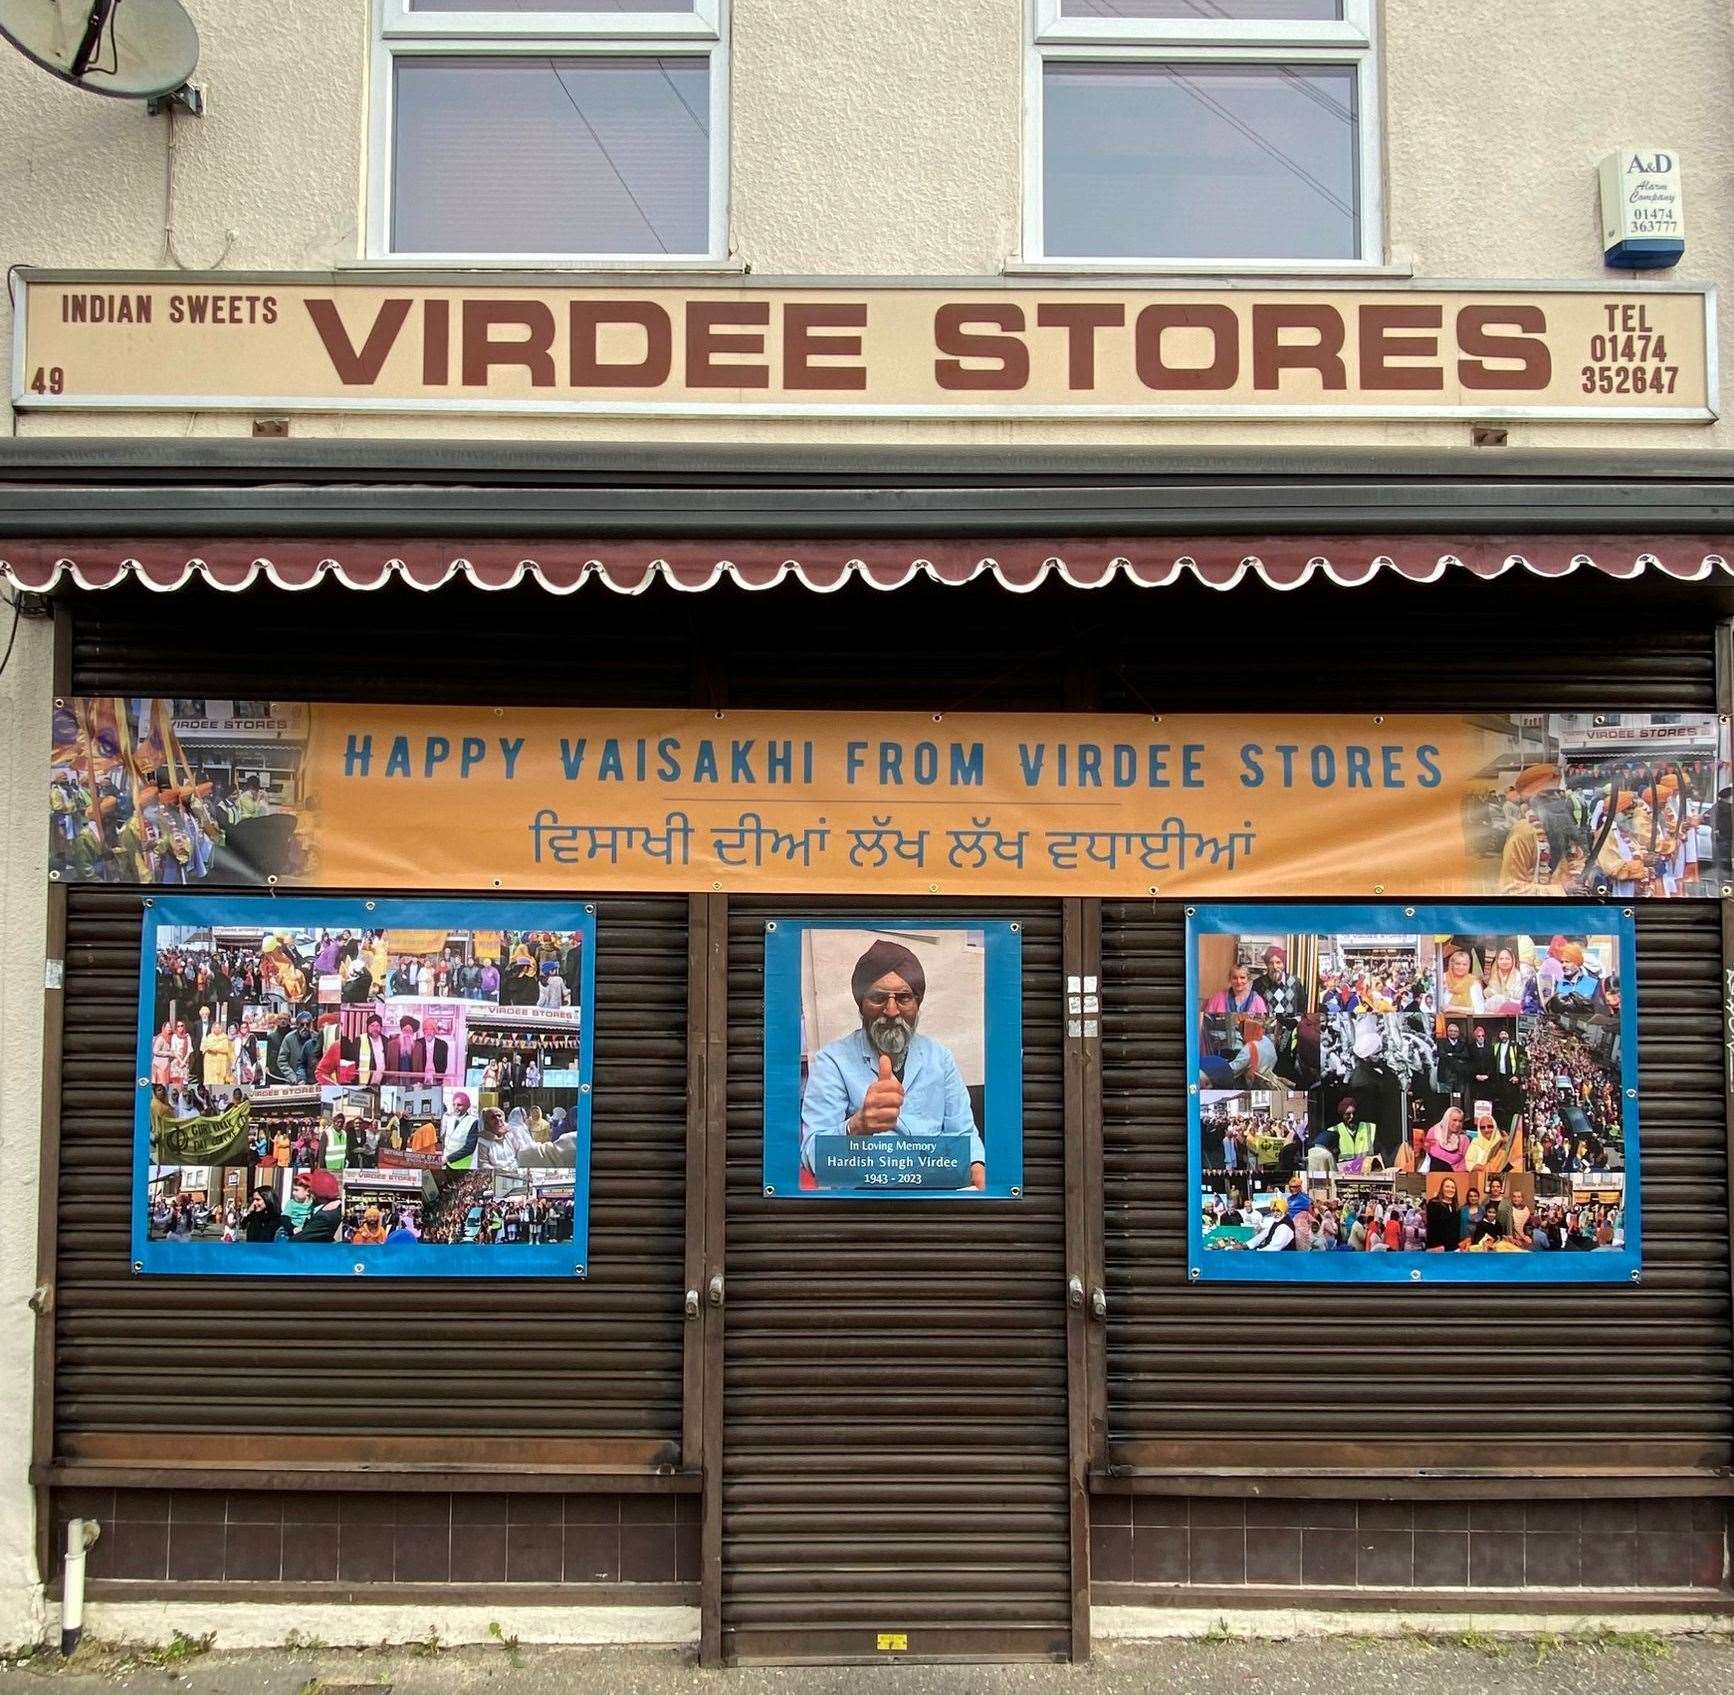 Memorial banners on Virdee Stores as it remains shut over the Vaisakhi period